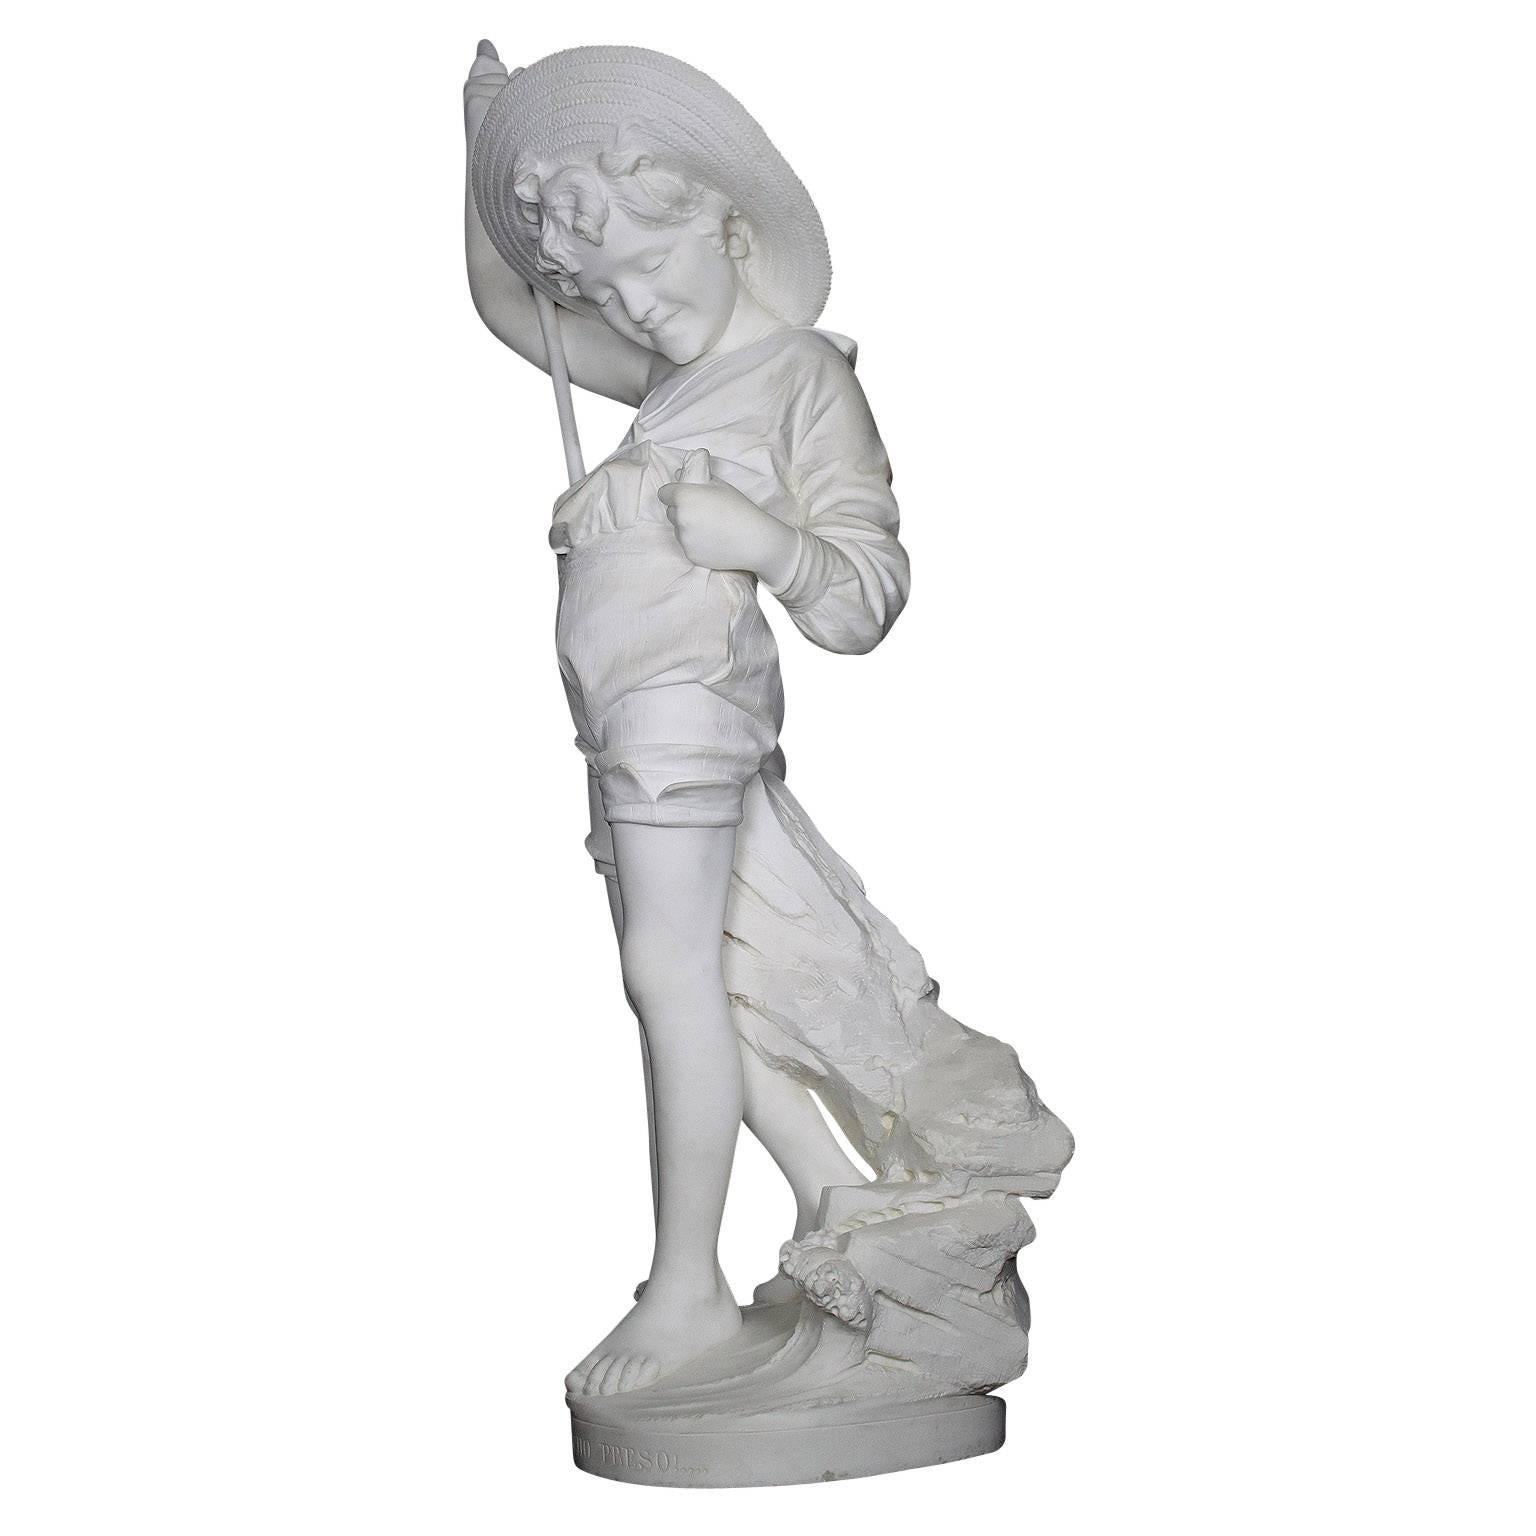 Large Italian 19th Century Carved Carrara Marble Figure of a Fisherman Boy For Sale 1